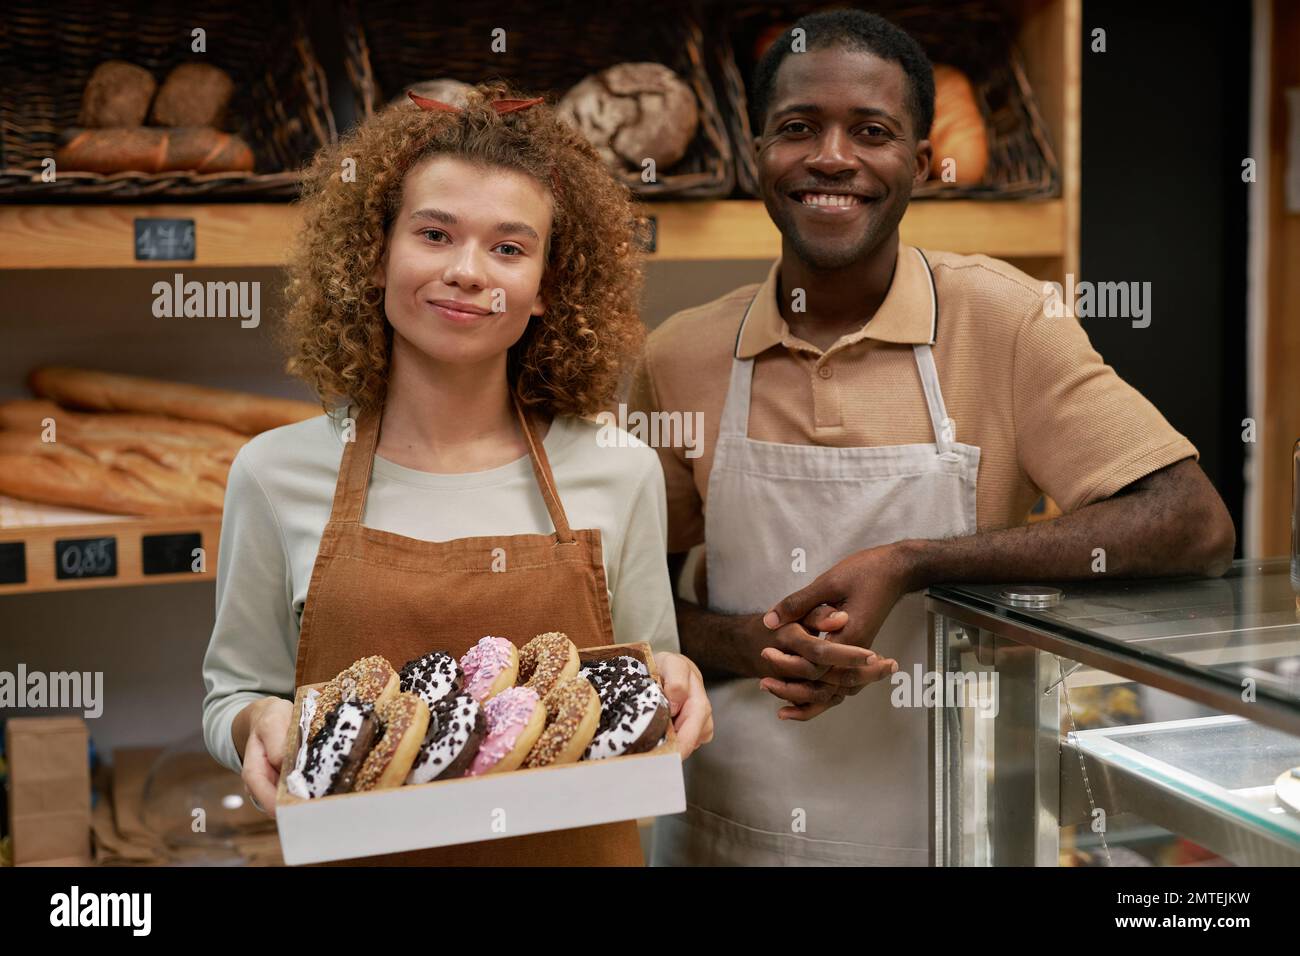 Portrait of happy bakery owners with box of fresh donuts Stock Photo